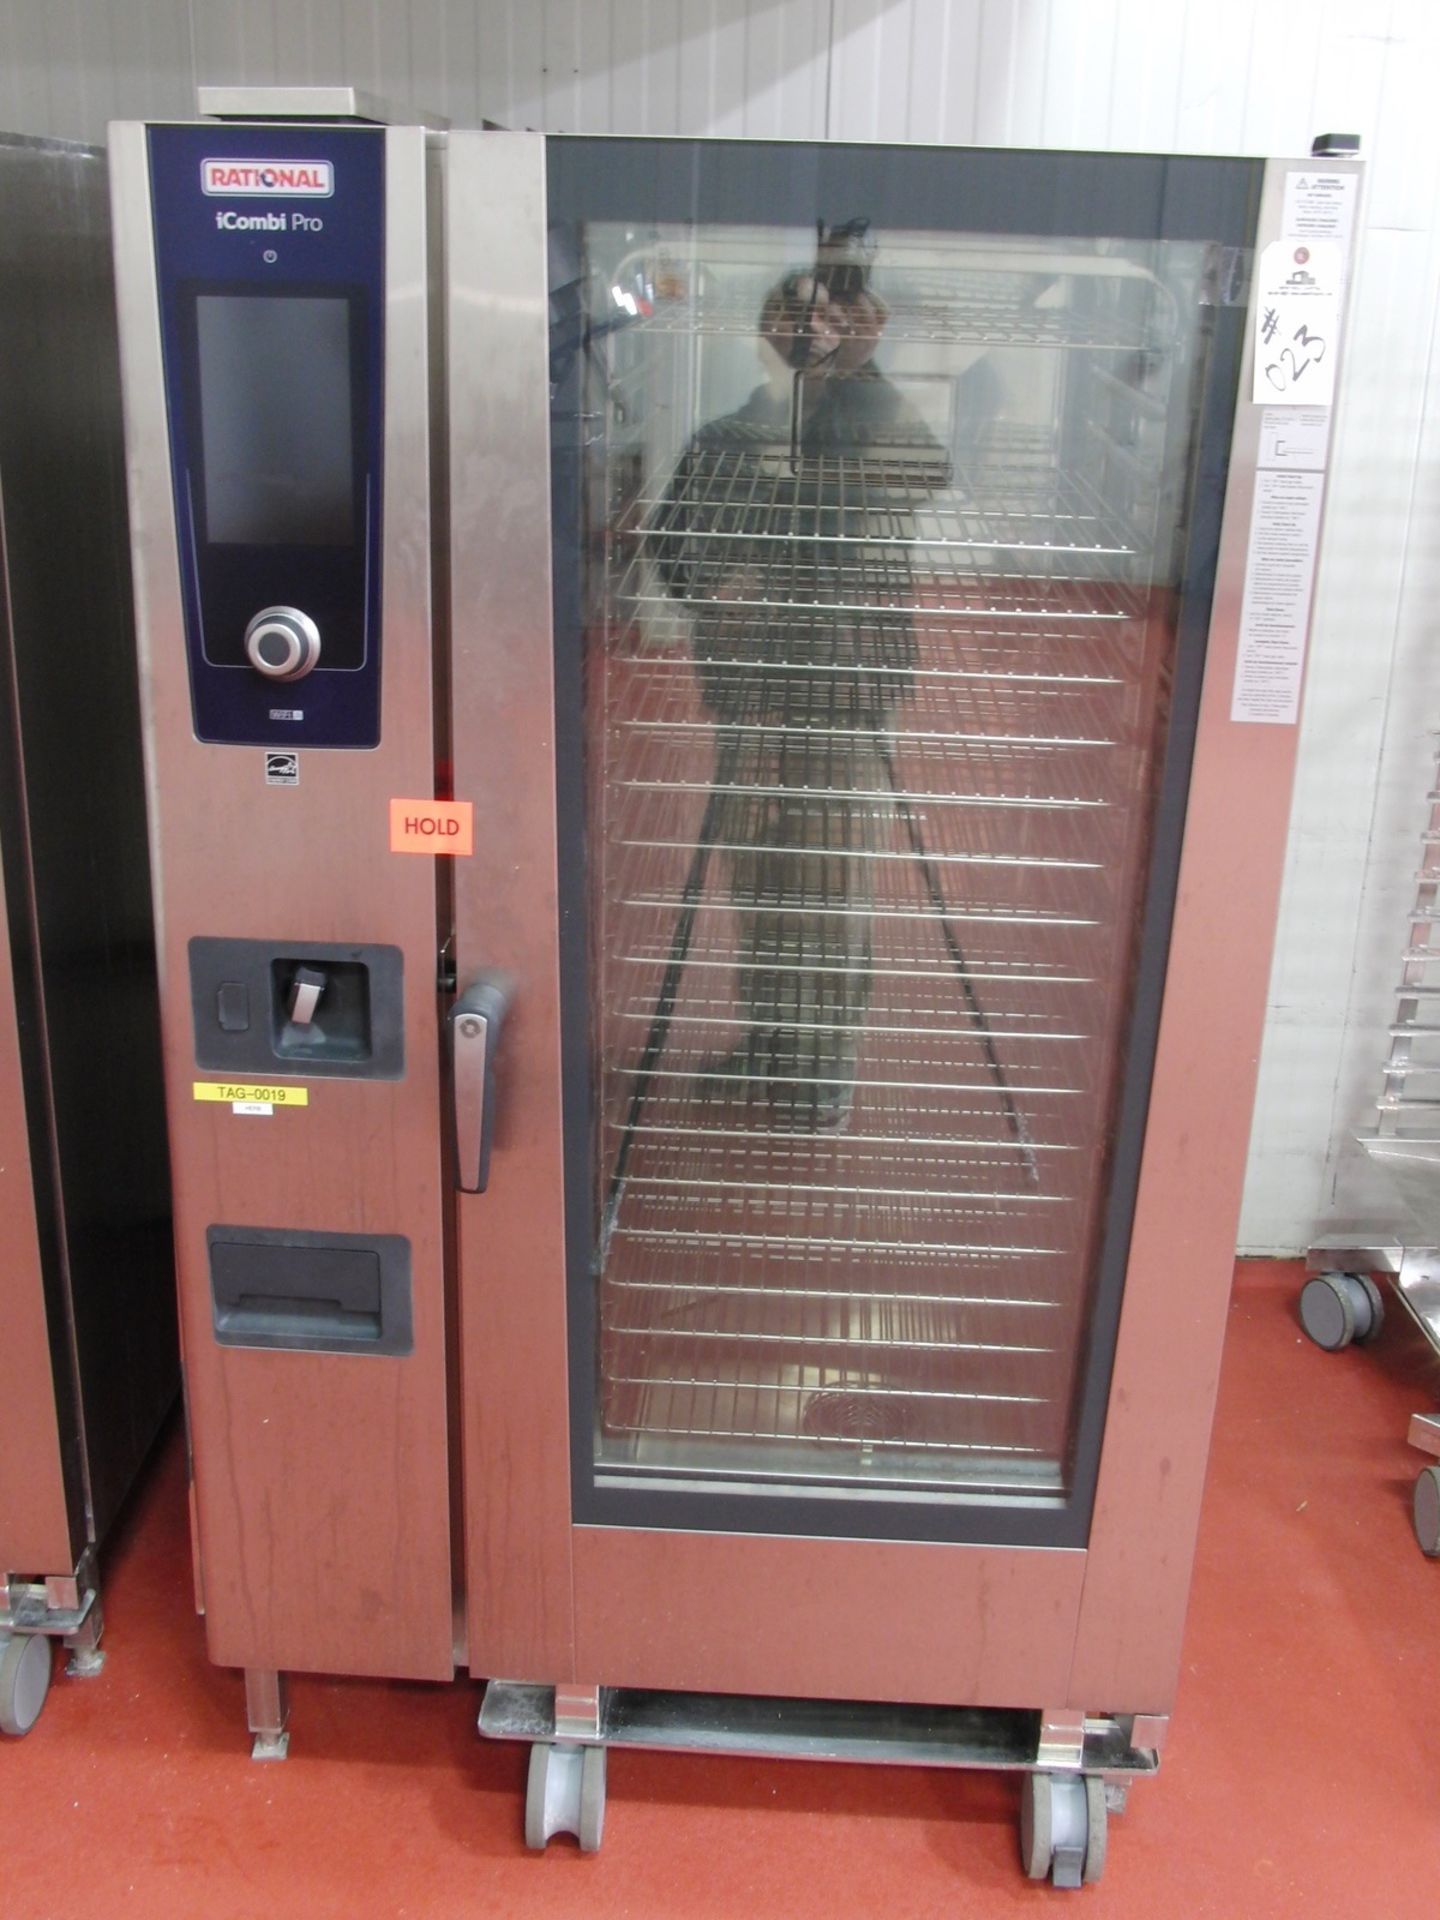 2021 Rational iCombi Pro Model LM100GG Steam Oven 240 v, 15 AMPS, 60 Hz, S/N: G22S | Rig Fee $500 - Image 3 of 4